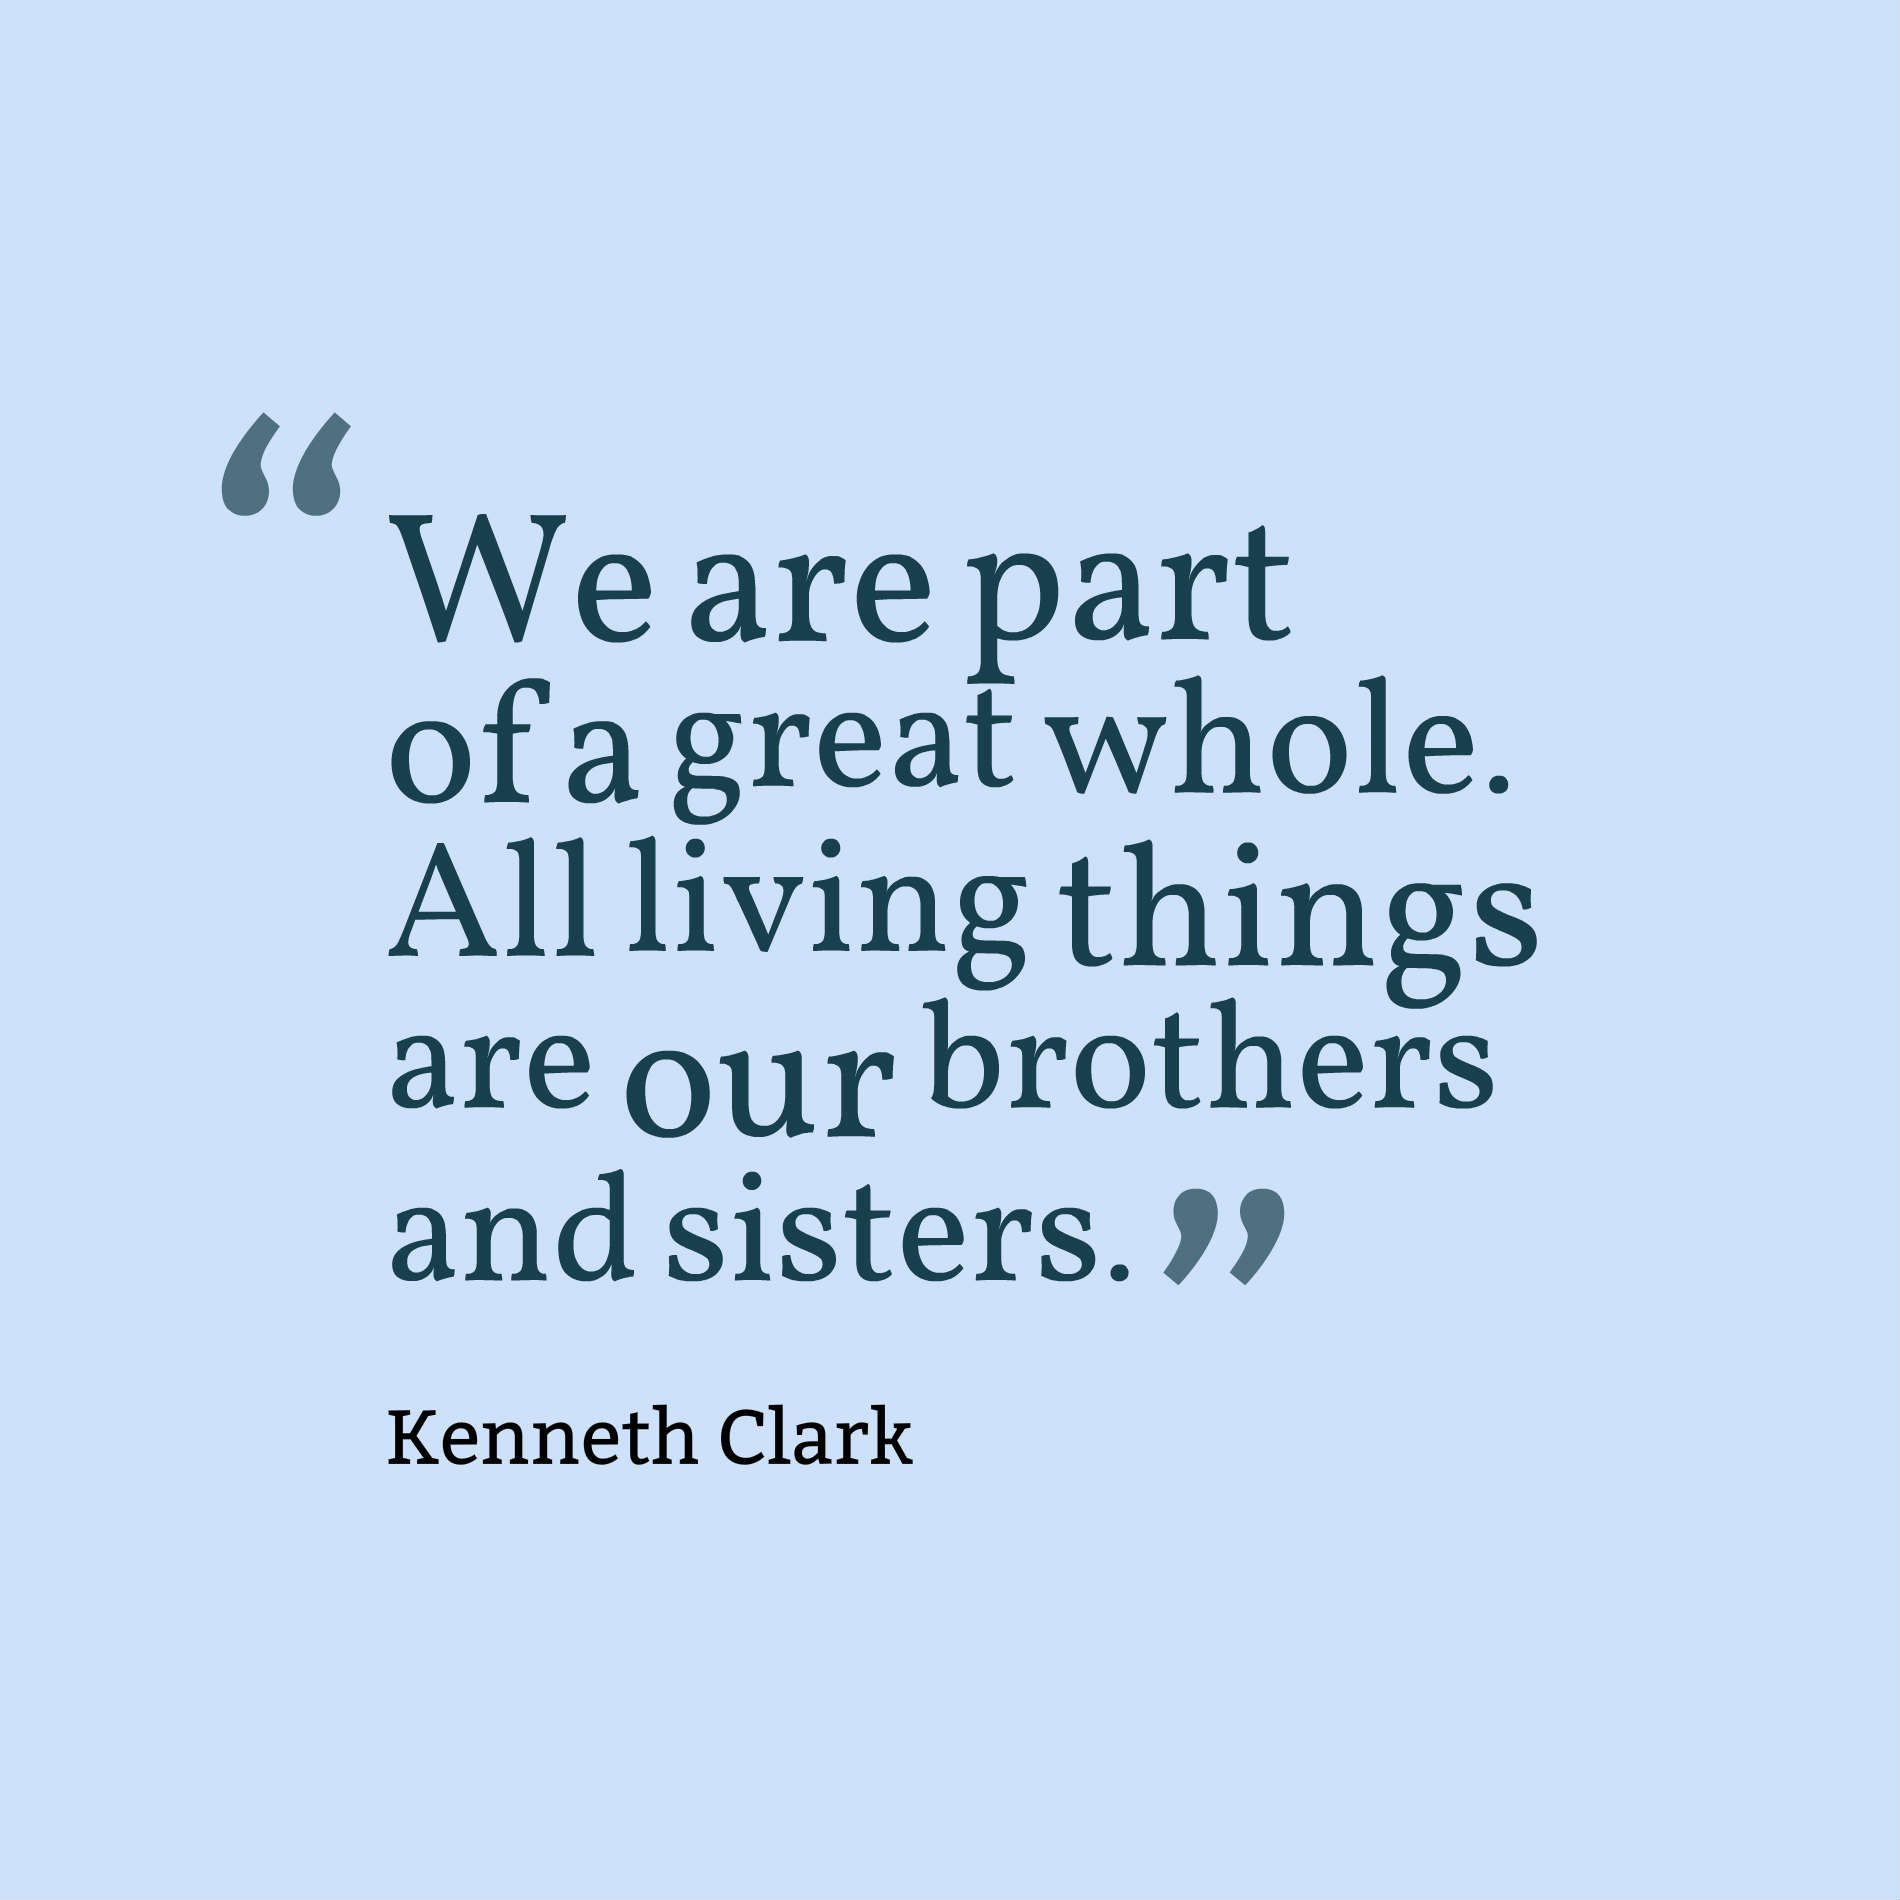 We are part of a great whole. All living things are our brothers and sisters.